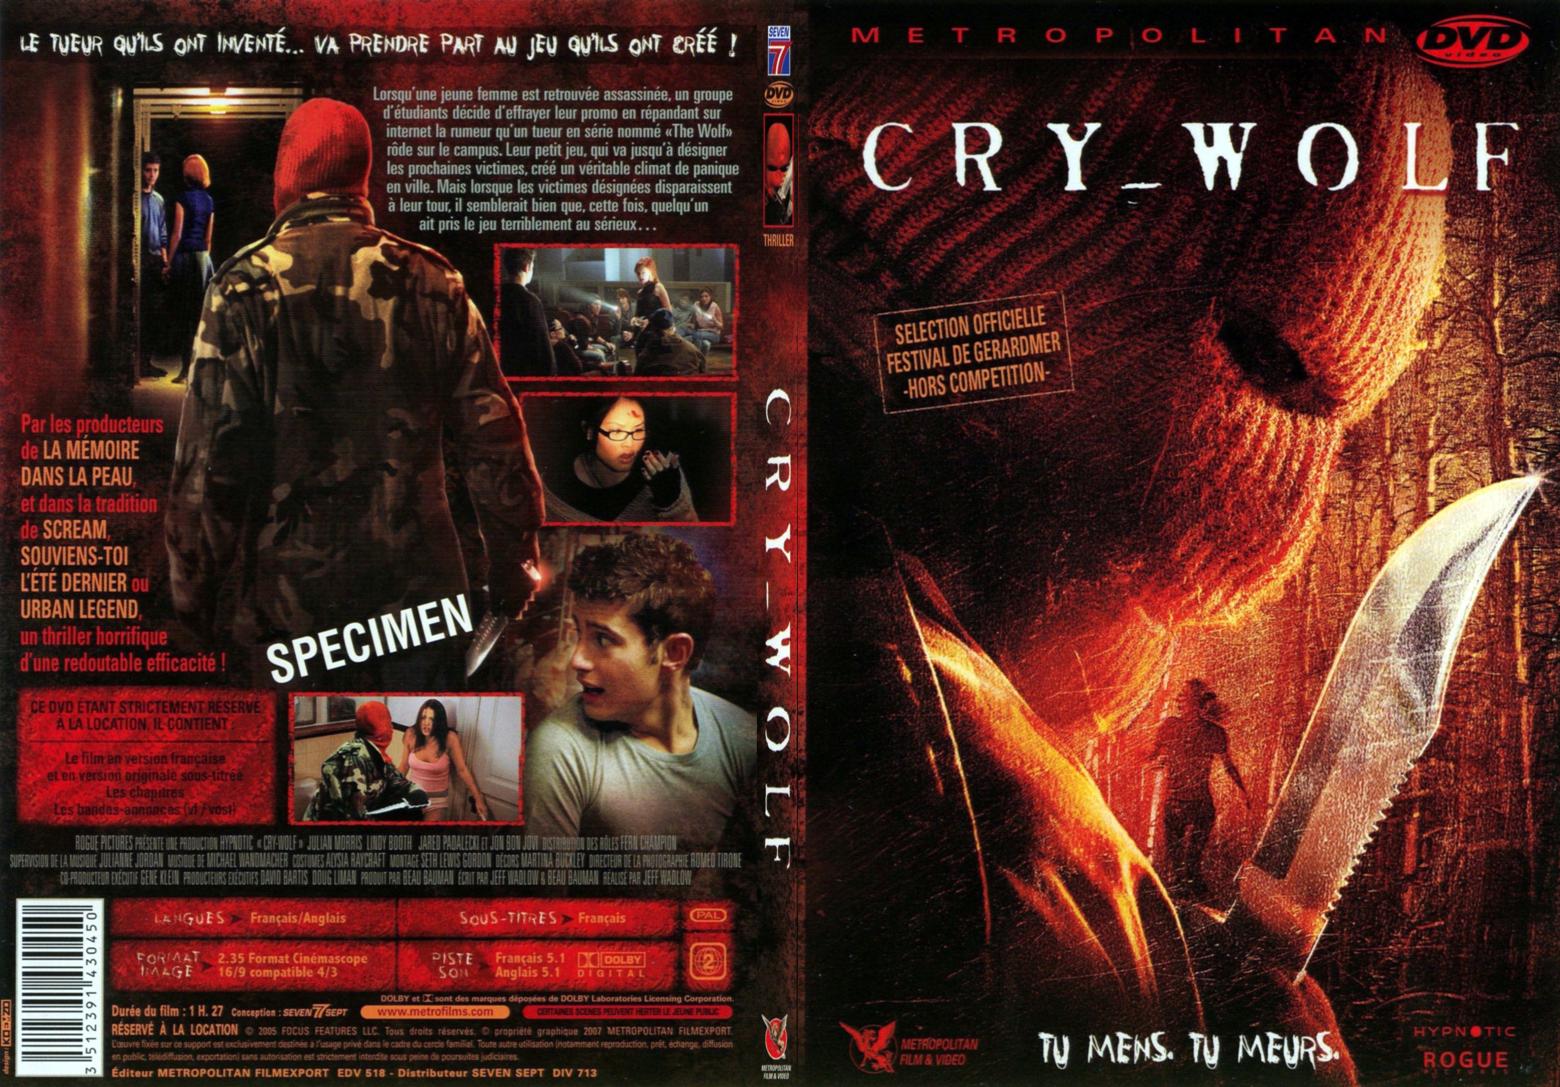 Jaquette DVD Cry wolf - SLIM